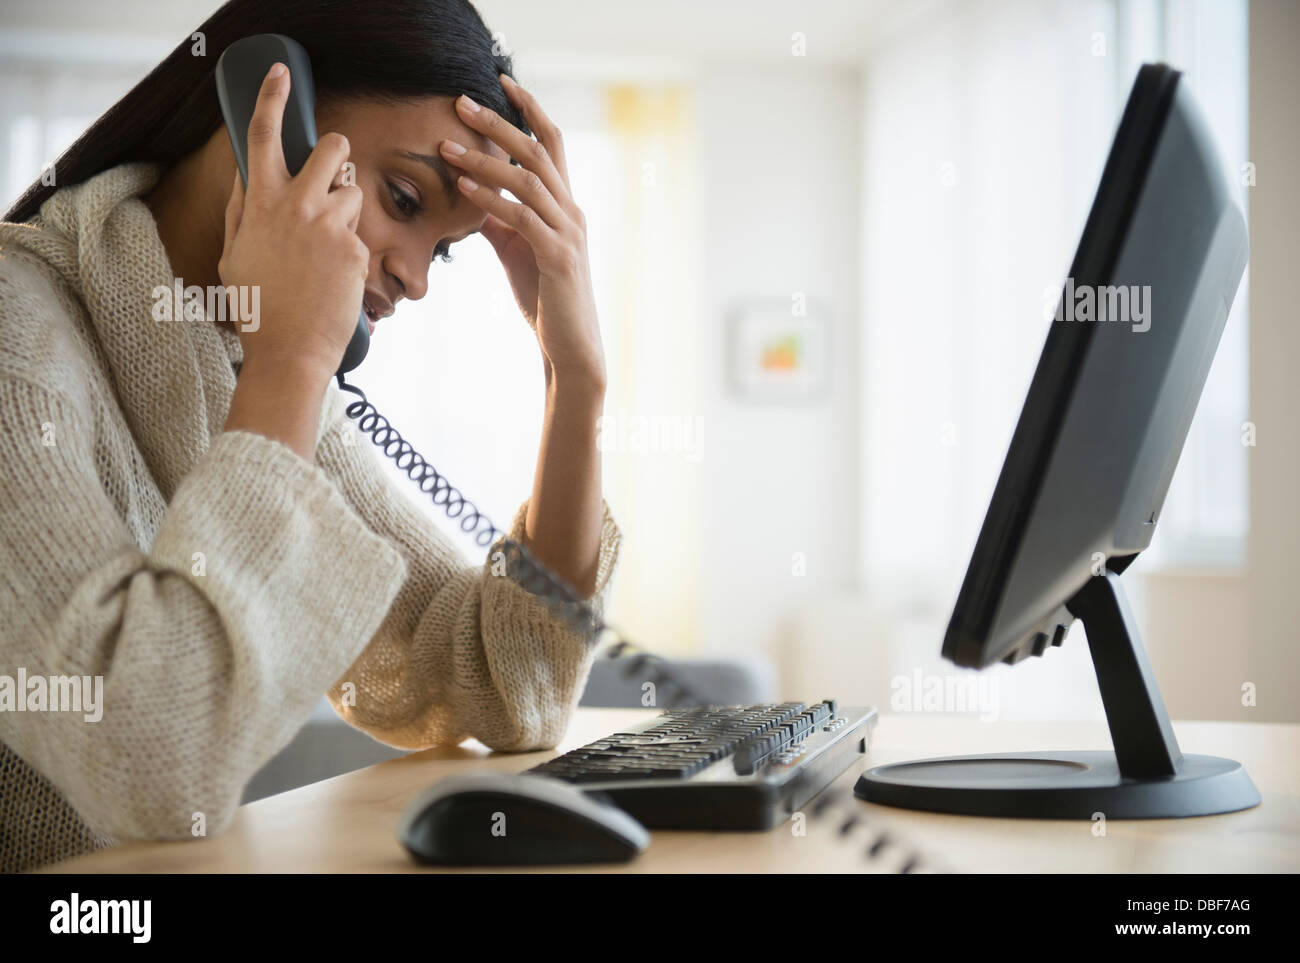 Mixed race woman talking on phone at desk Stock Photo